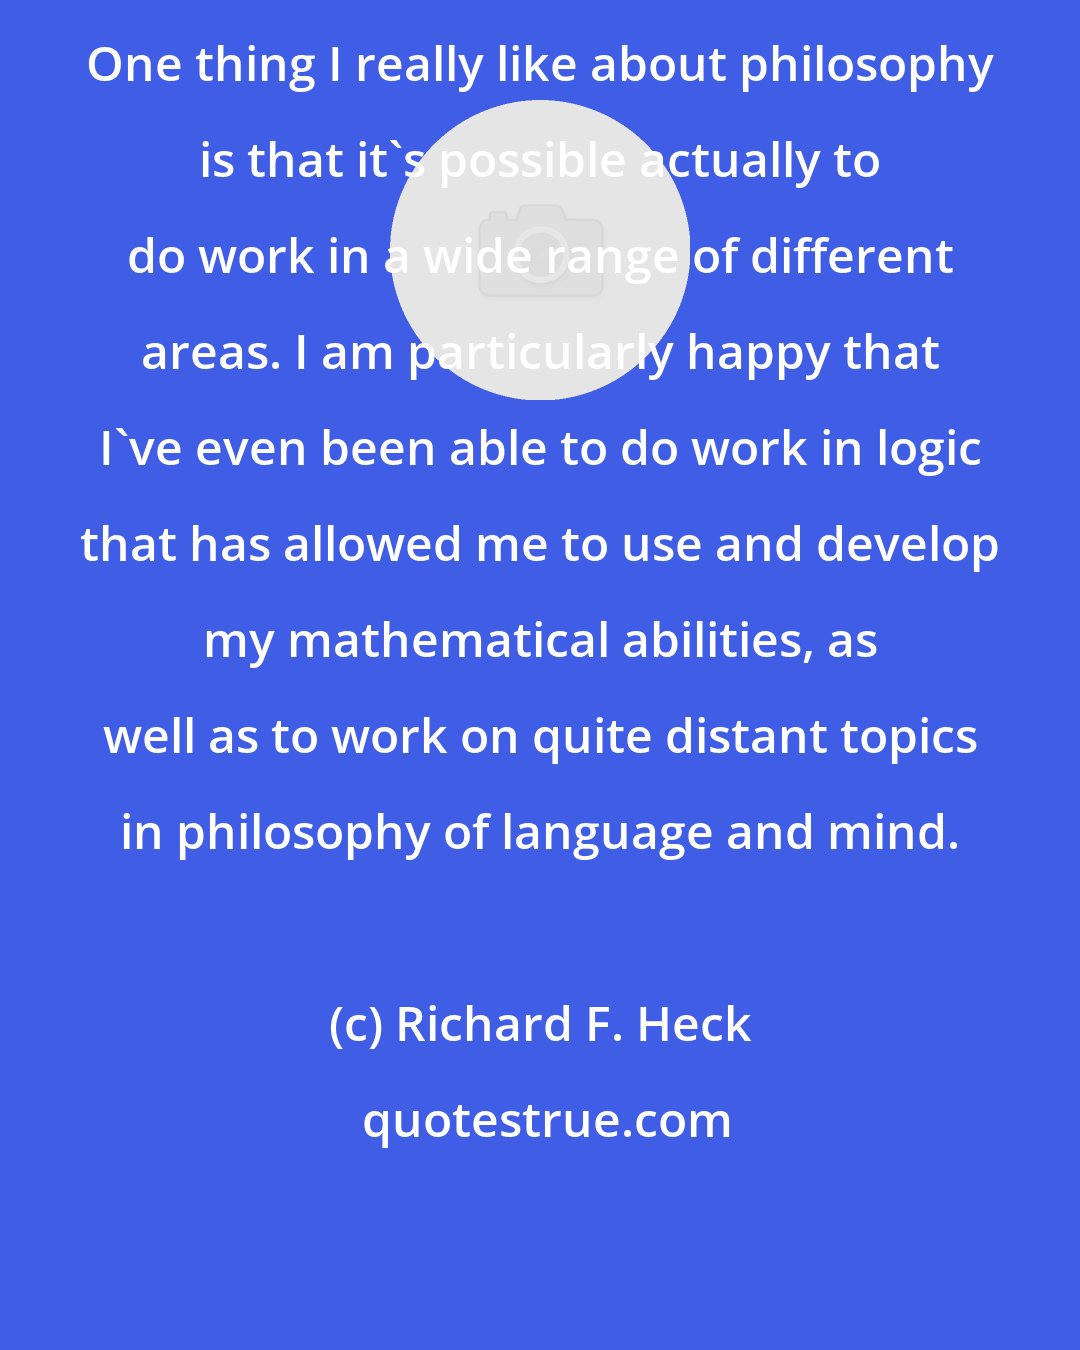 Richard F. Heck: One thing I really like about philosophy is that it's possible actually to do work in a wide range of different areas. I am particularly happy that I've even been able to do work in logic that has allowed me to use and develop my mathematical abilities, as well as to work on quite distant topics in philosophy of language and mind.